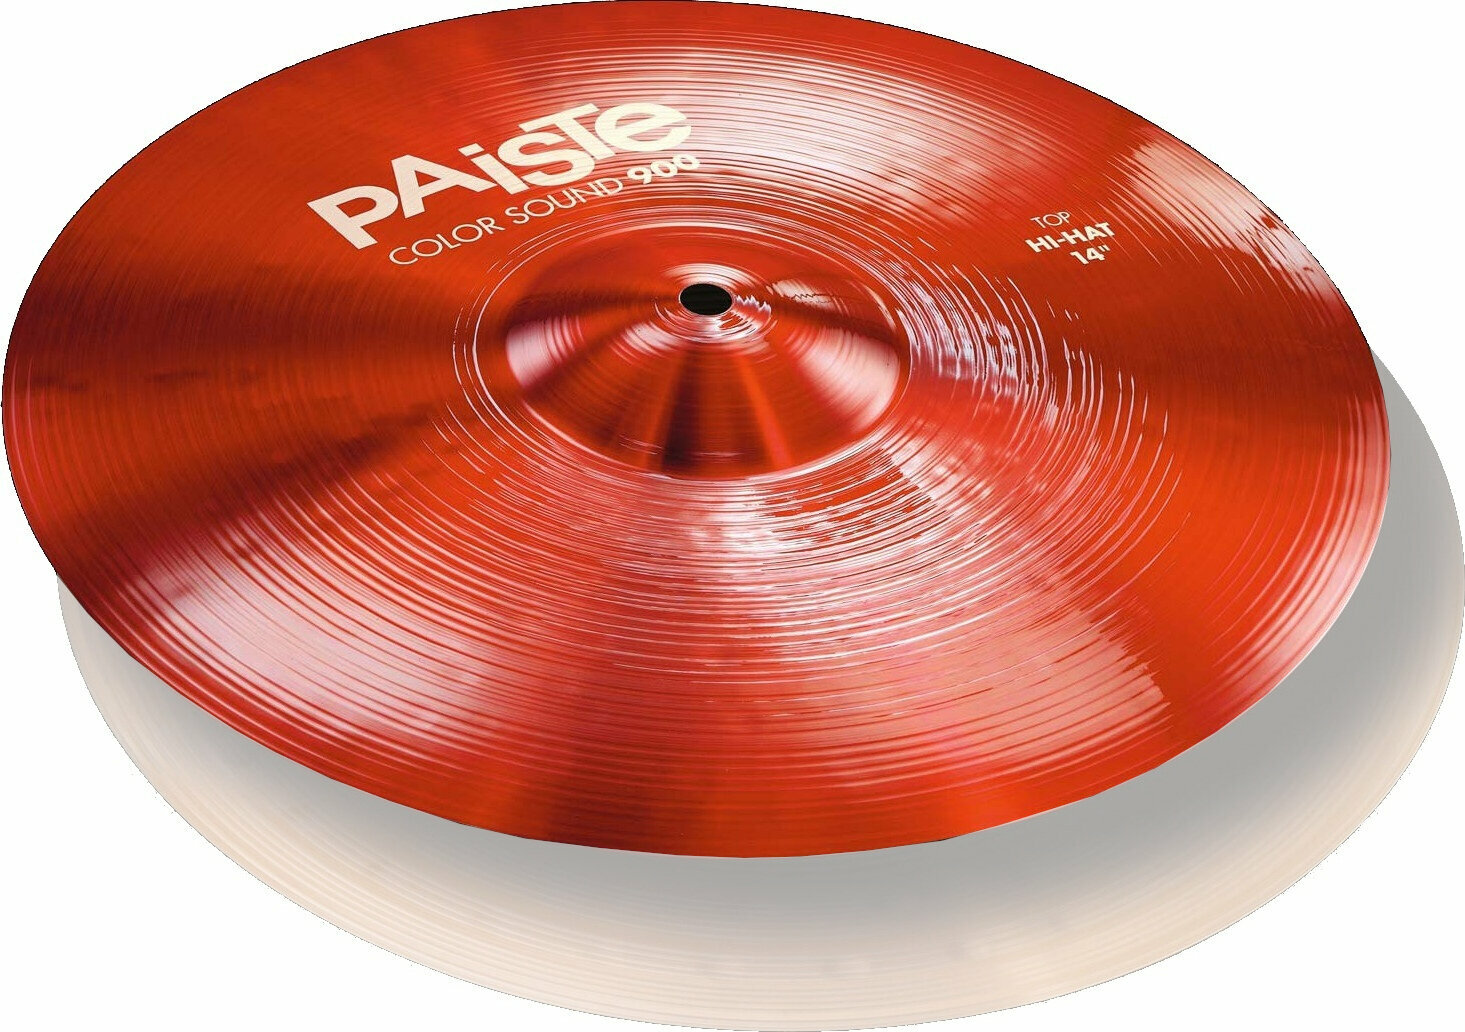 Cymbale charleston Paiste Color Sound 900  Top Cymbale charleston 14" Rouge